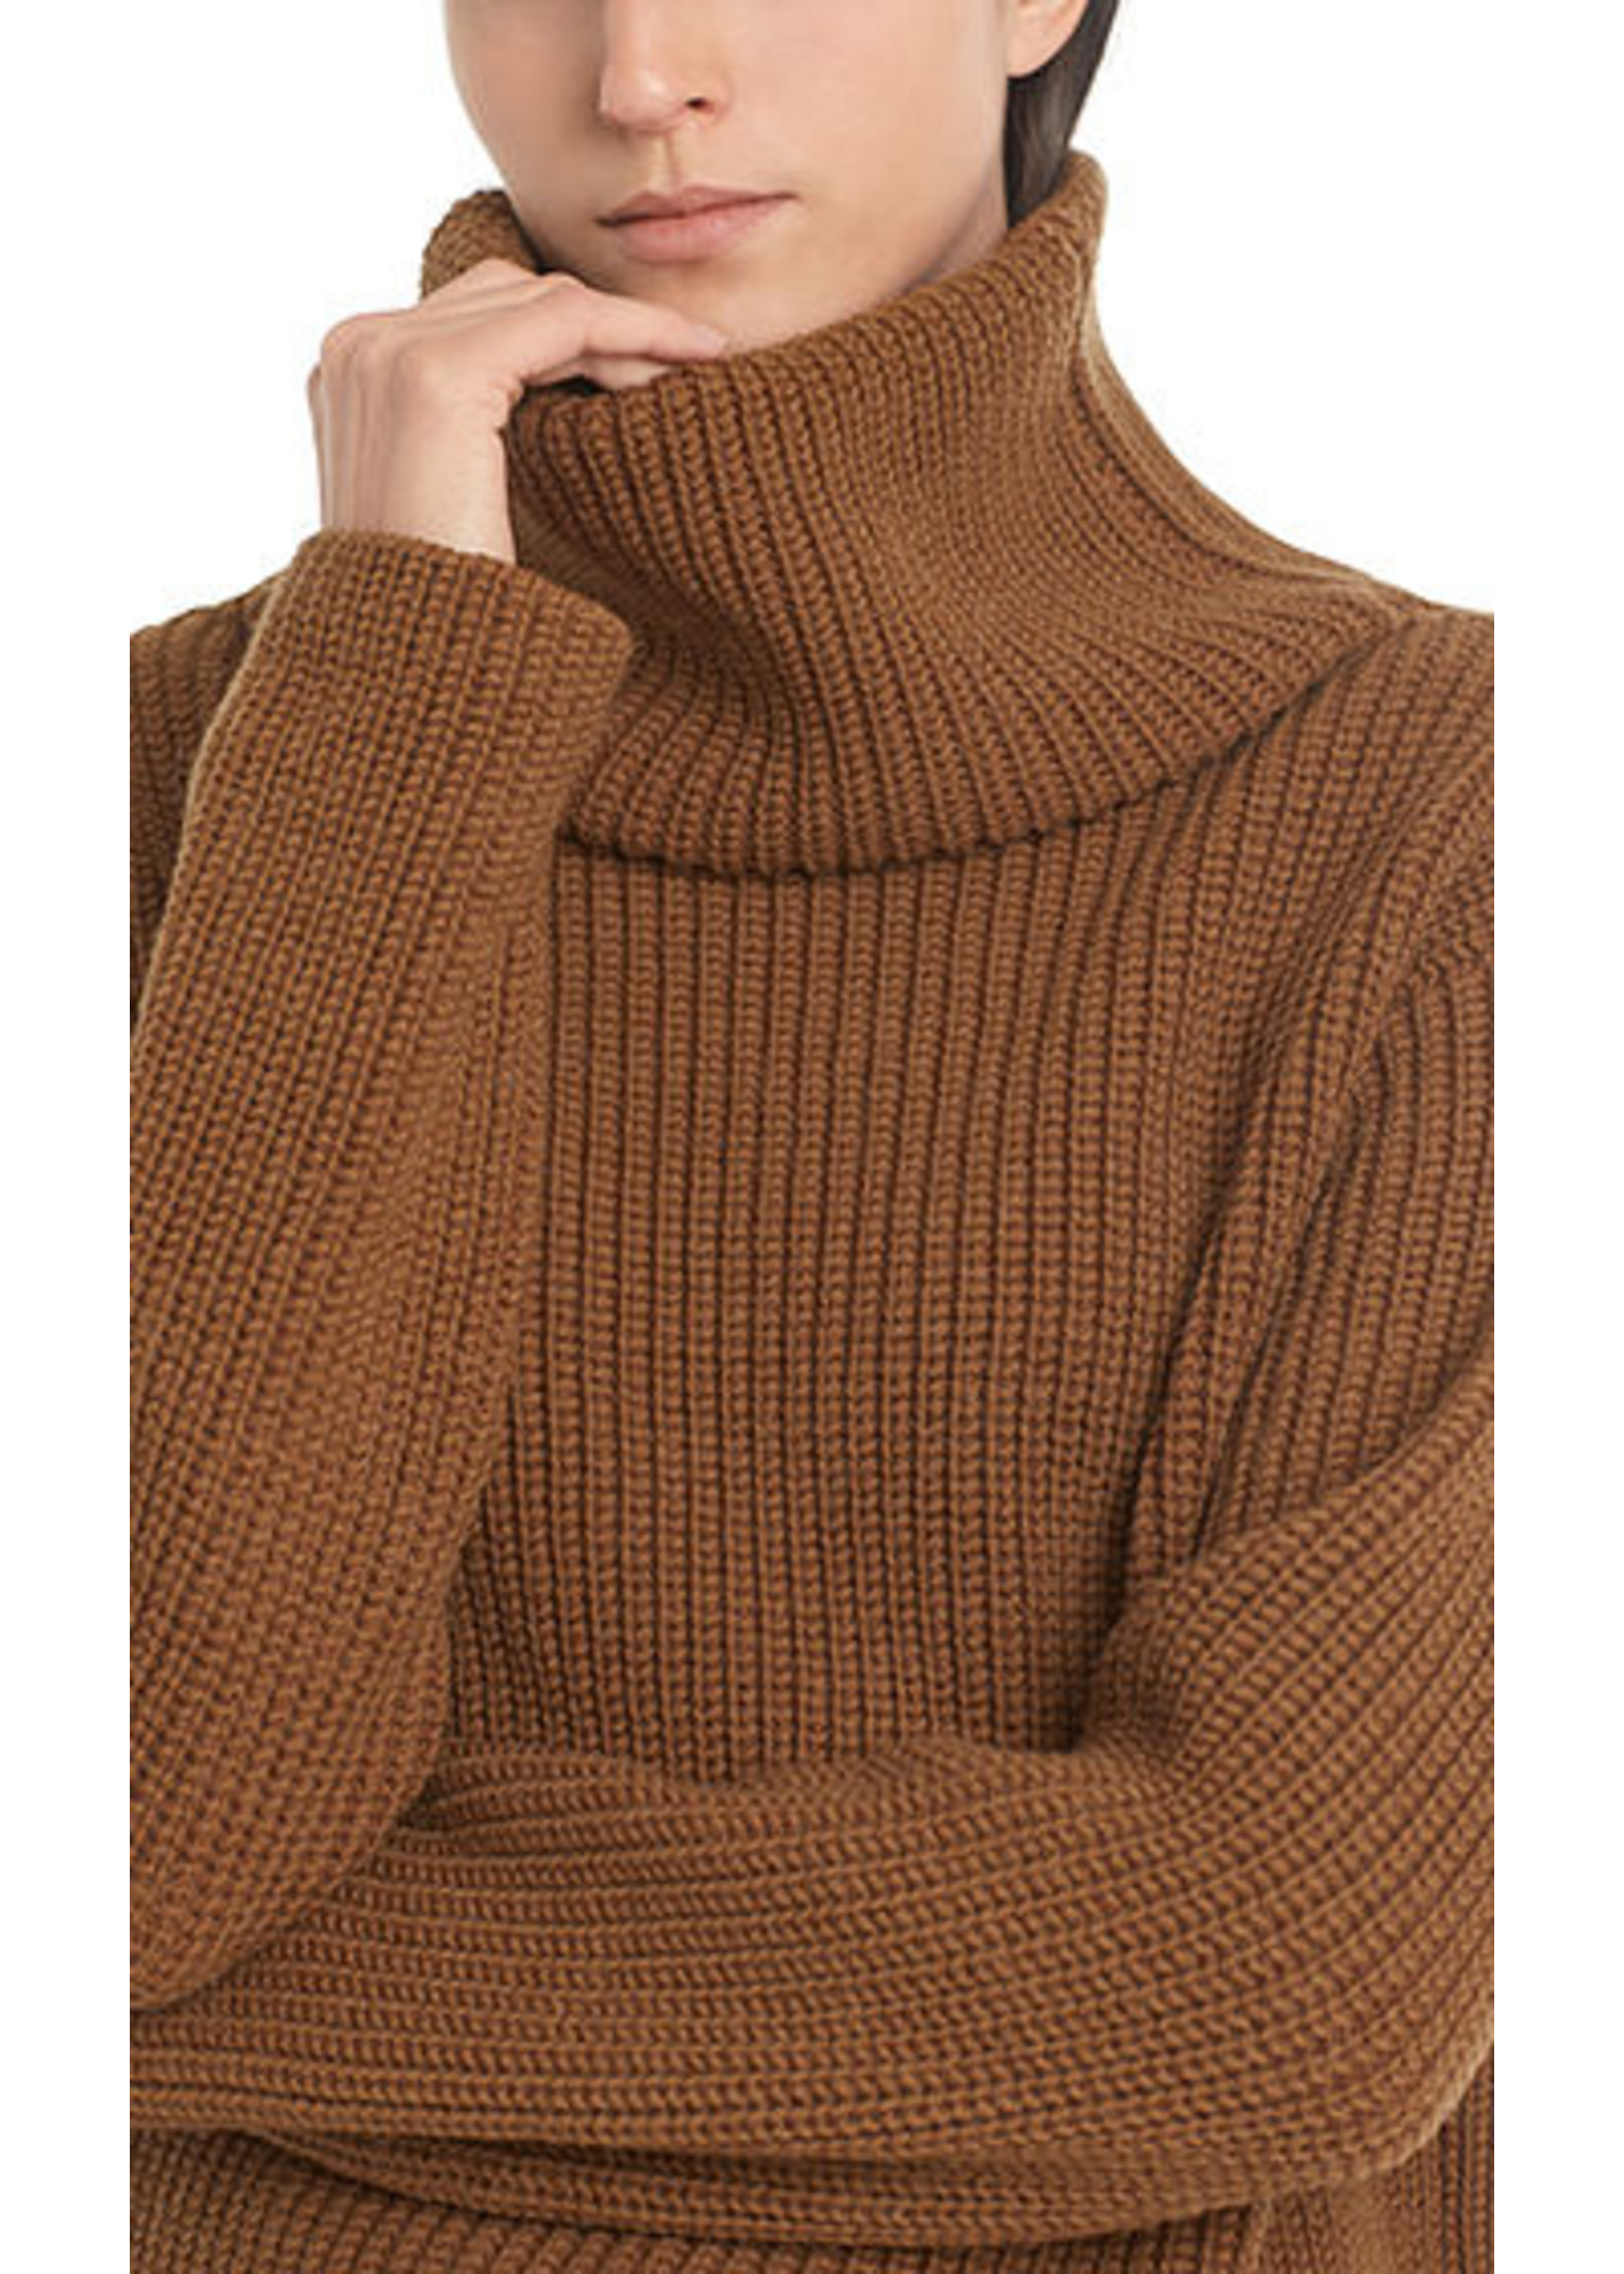 Marccain Sports Sweater RS 41.23 M18 sienna